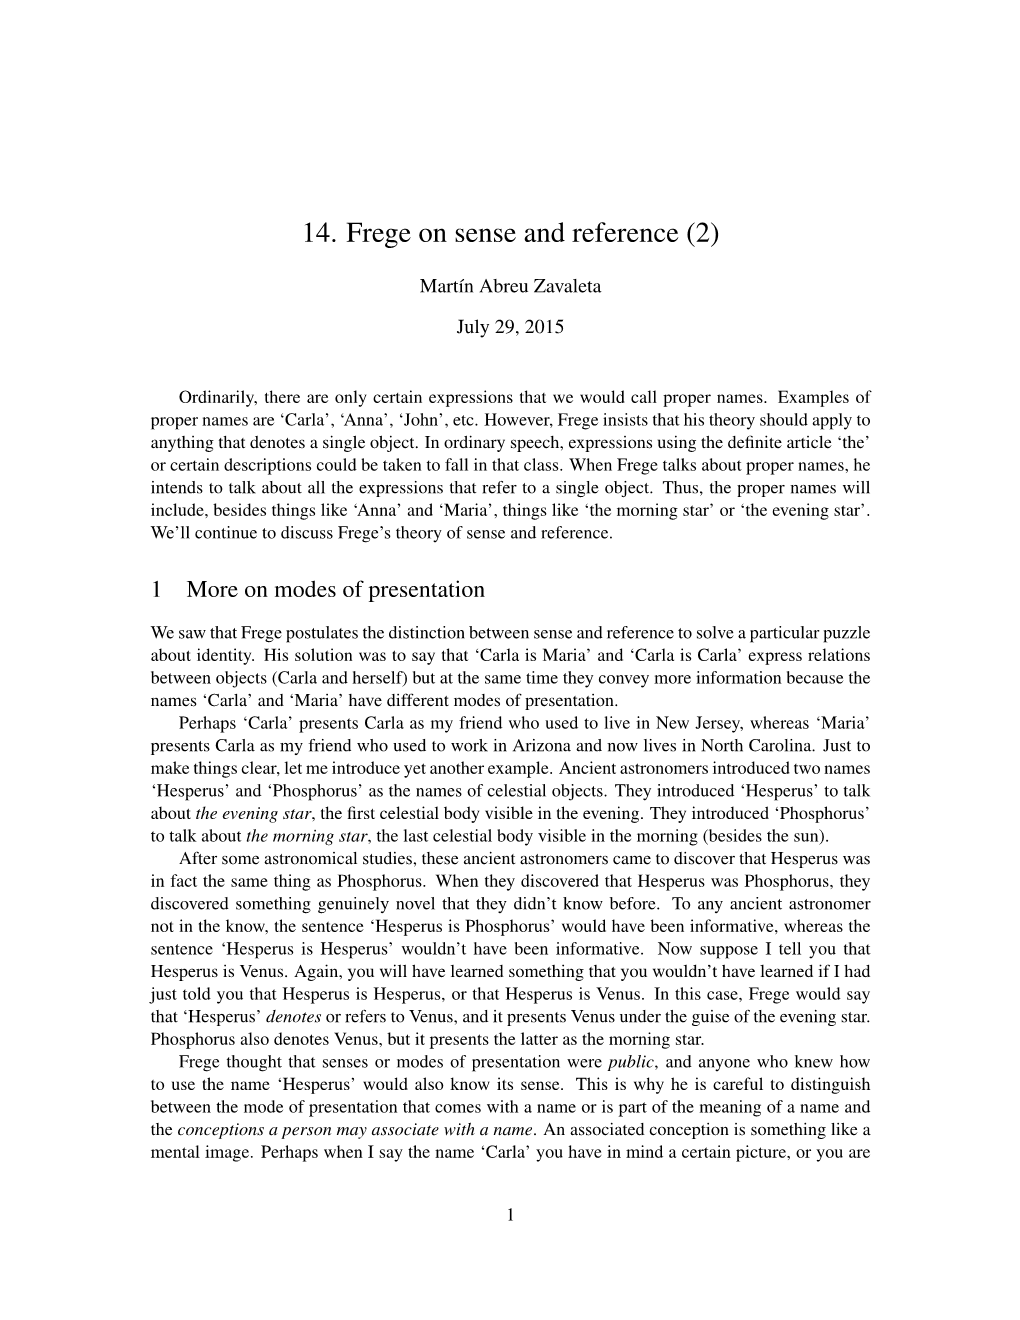 14. Frege on Sense and Reference (2)